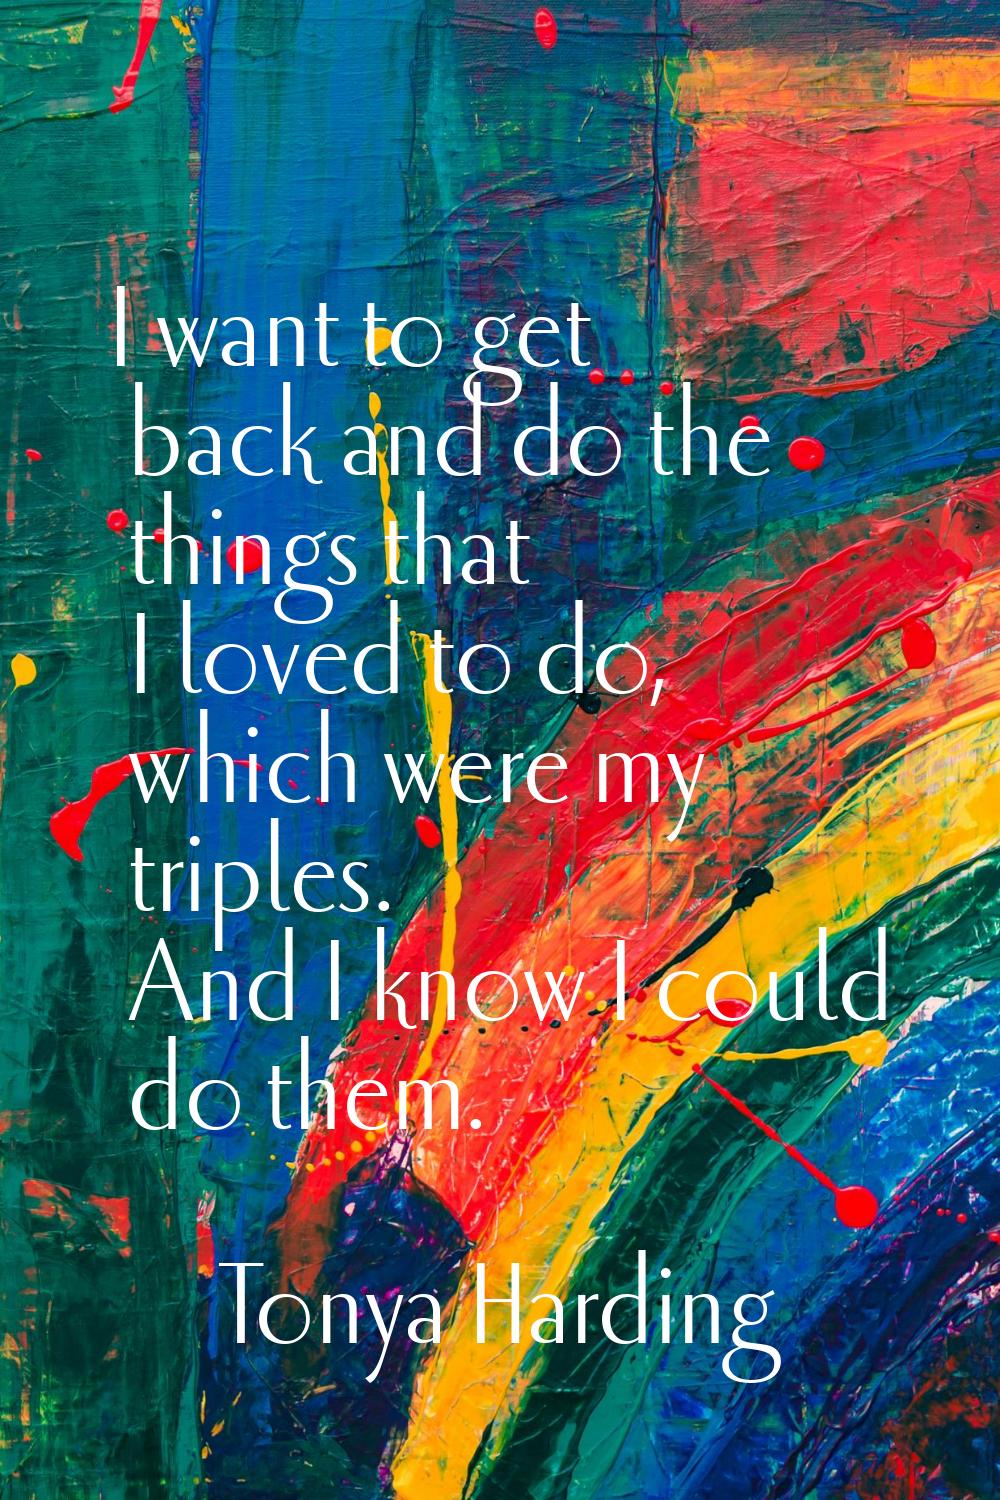 I want to get back and do the things that I loved to do, which were my triples. And I know I could 